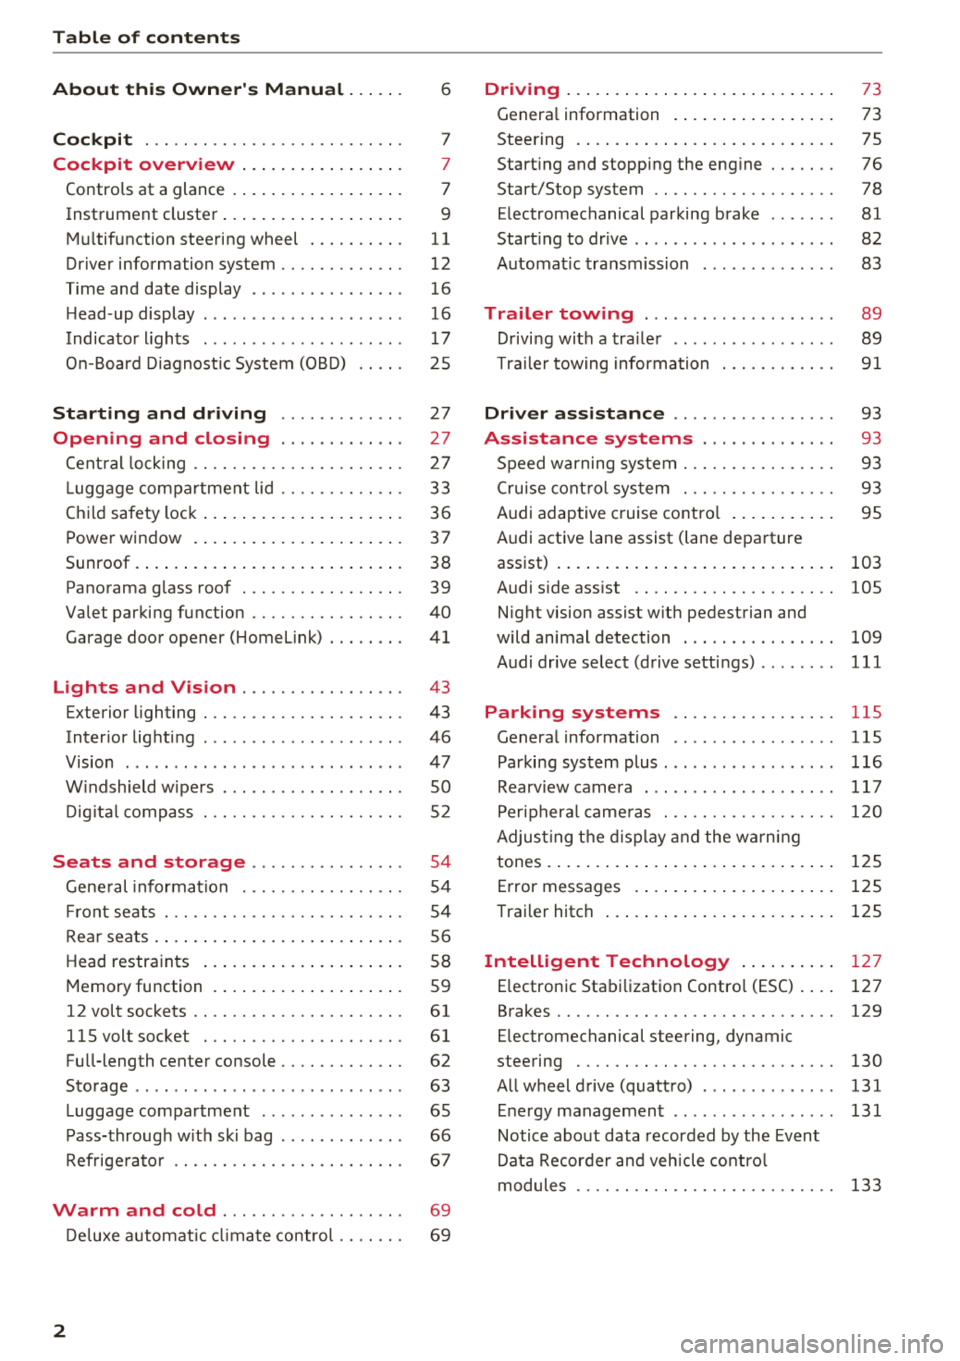 AUDI A8 2018  Owners Manual Table of  contents 
About  this  Owners  Manual.  . .  . . . 
6 
Cockpit  . . .  . .  . . . . . . . . . . . . . . .  . . . .  . .  . 7 
Cockpit  overview  . .  . . . . .  . . .  . .  . .  . . . 7 
Co